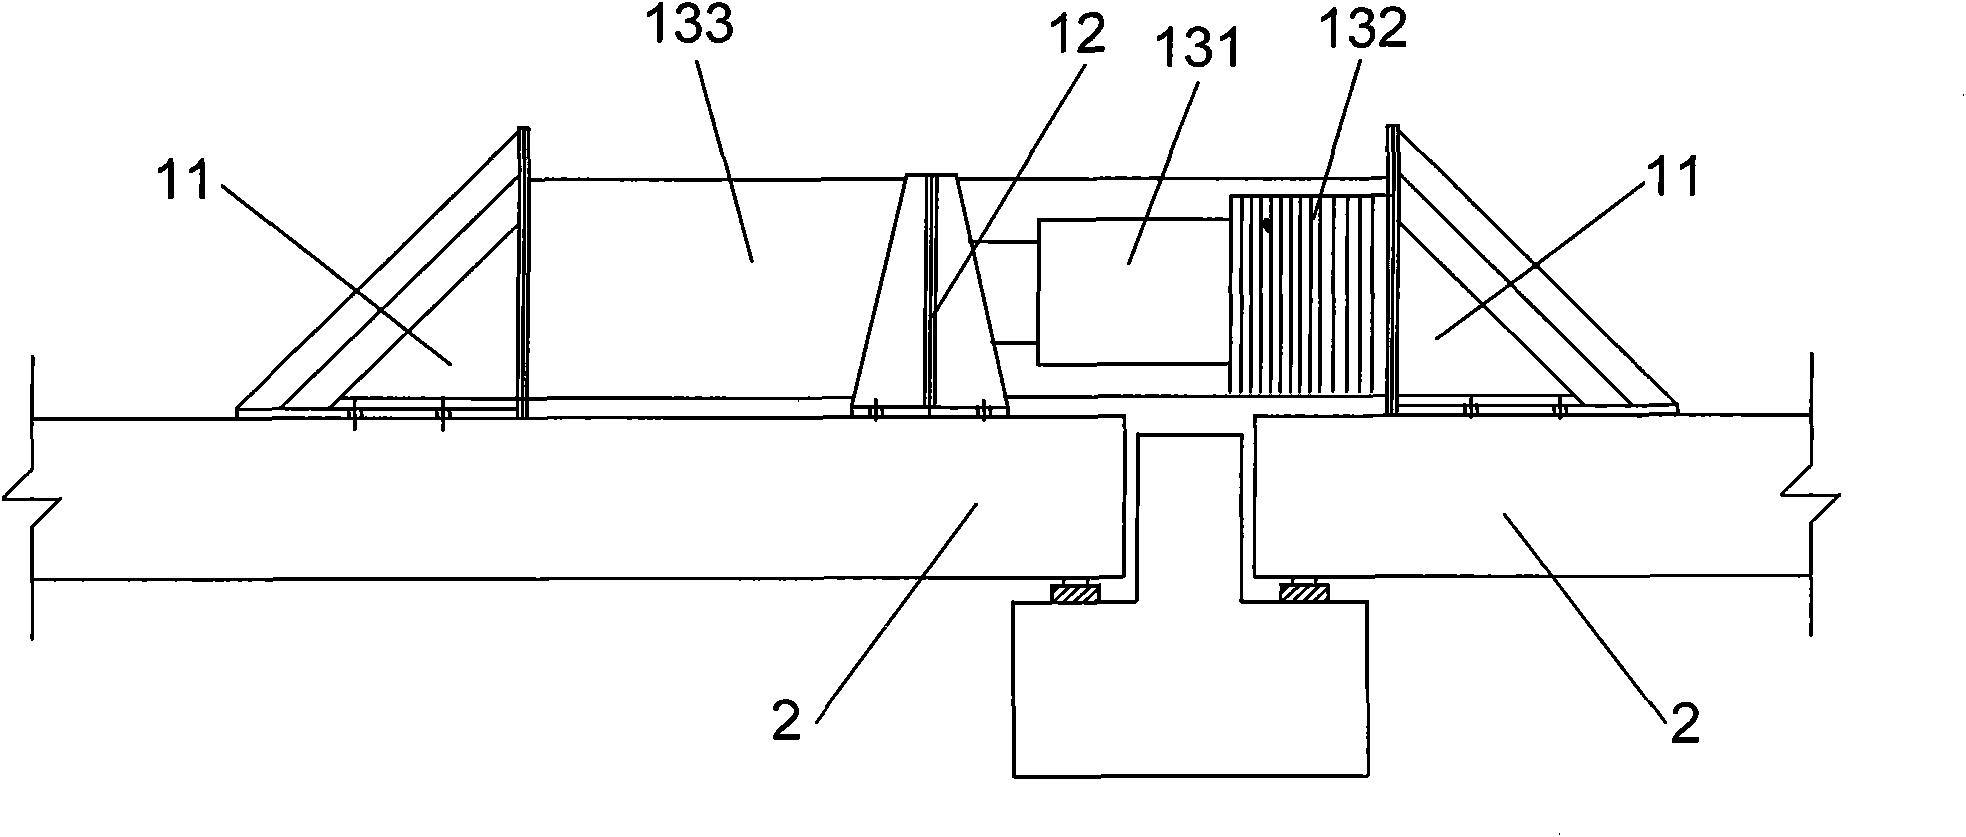 Traction limiting device used for jacking counter-slope of bridge